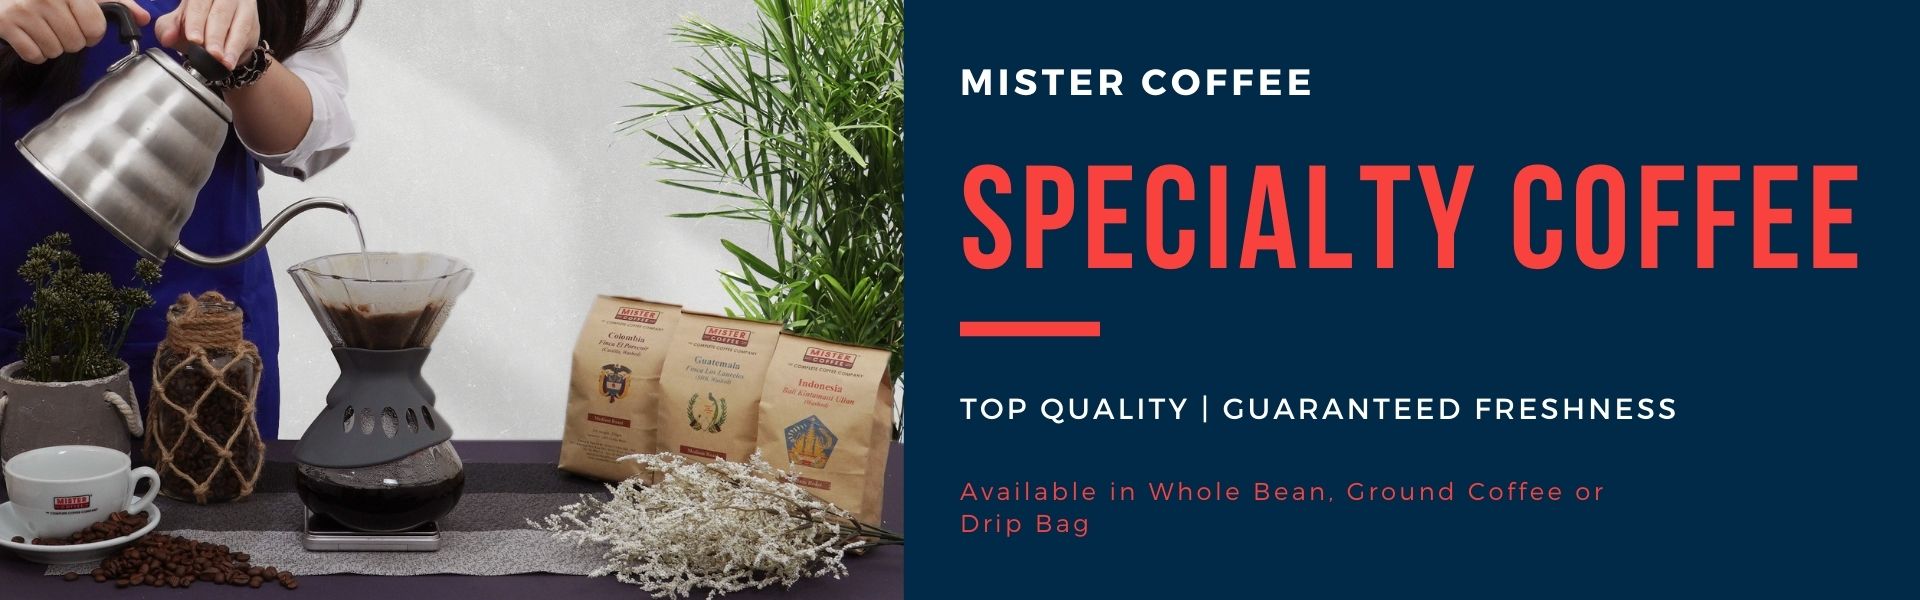 Specialty Coffee Mister Coffee